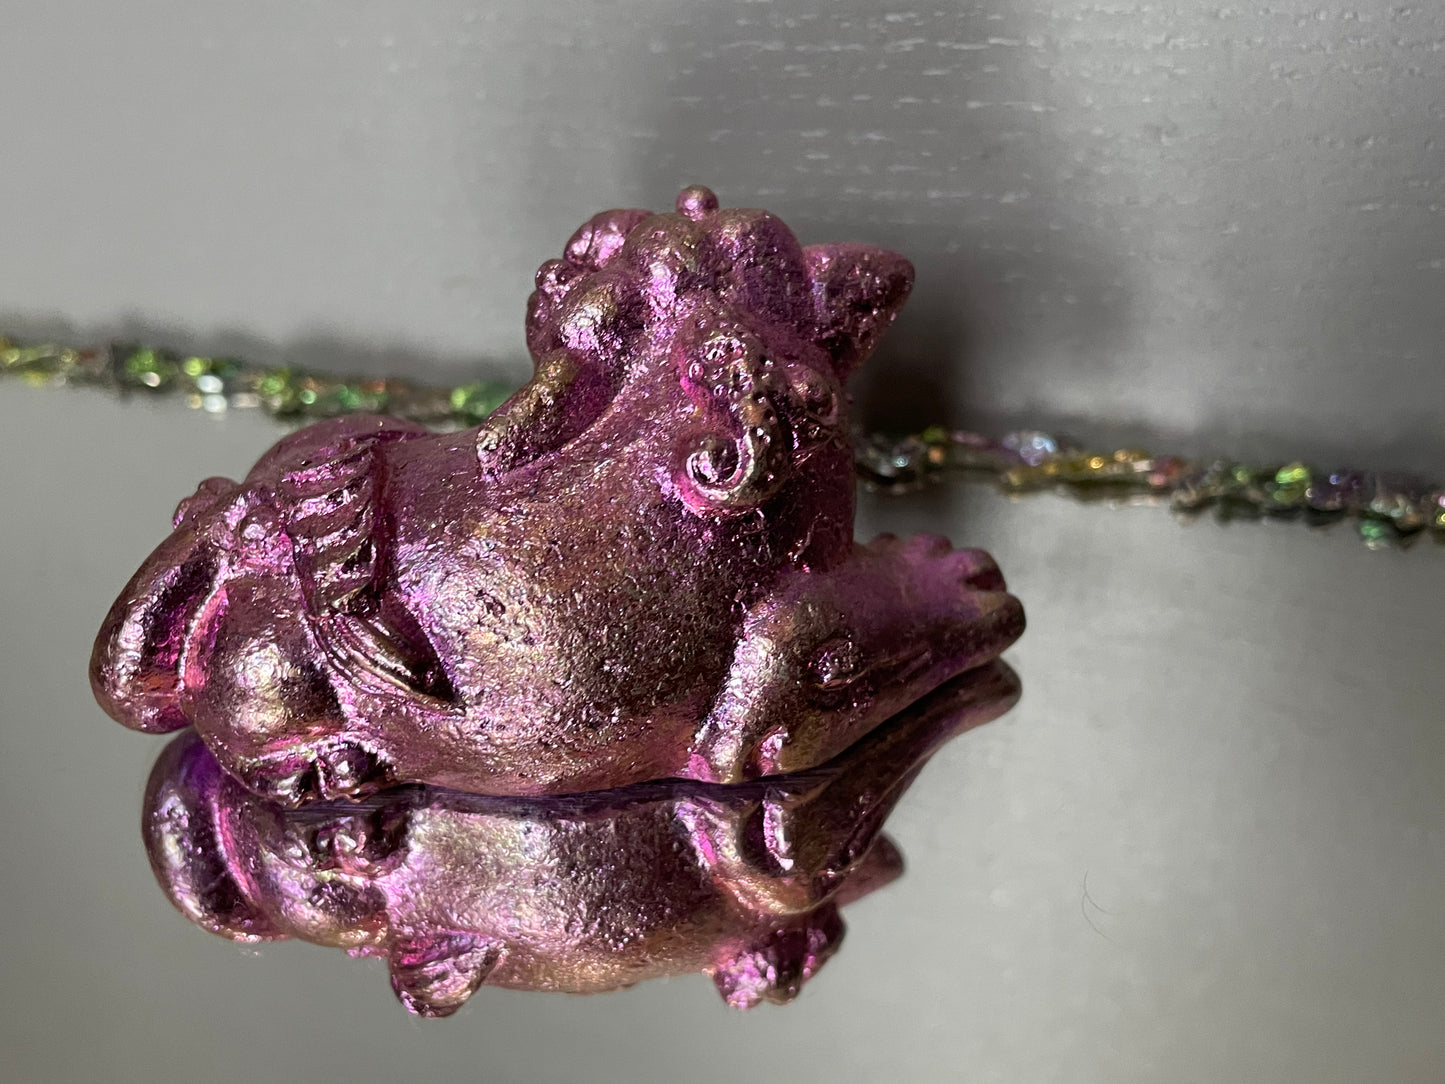 Pink Bismuth Crystal Chinese Foo Dog (RIGHT SIDE) - Metal Art Sculpture